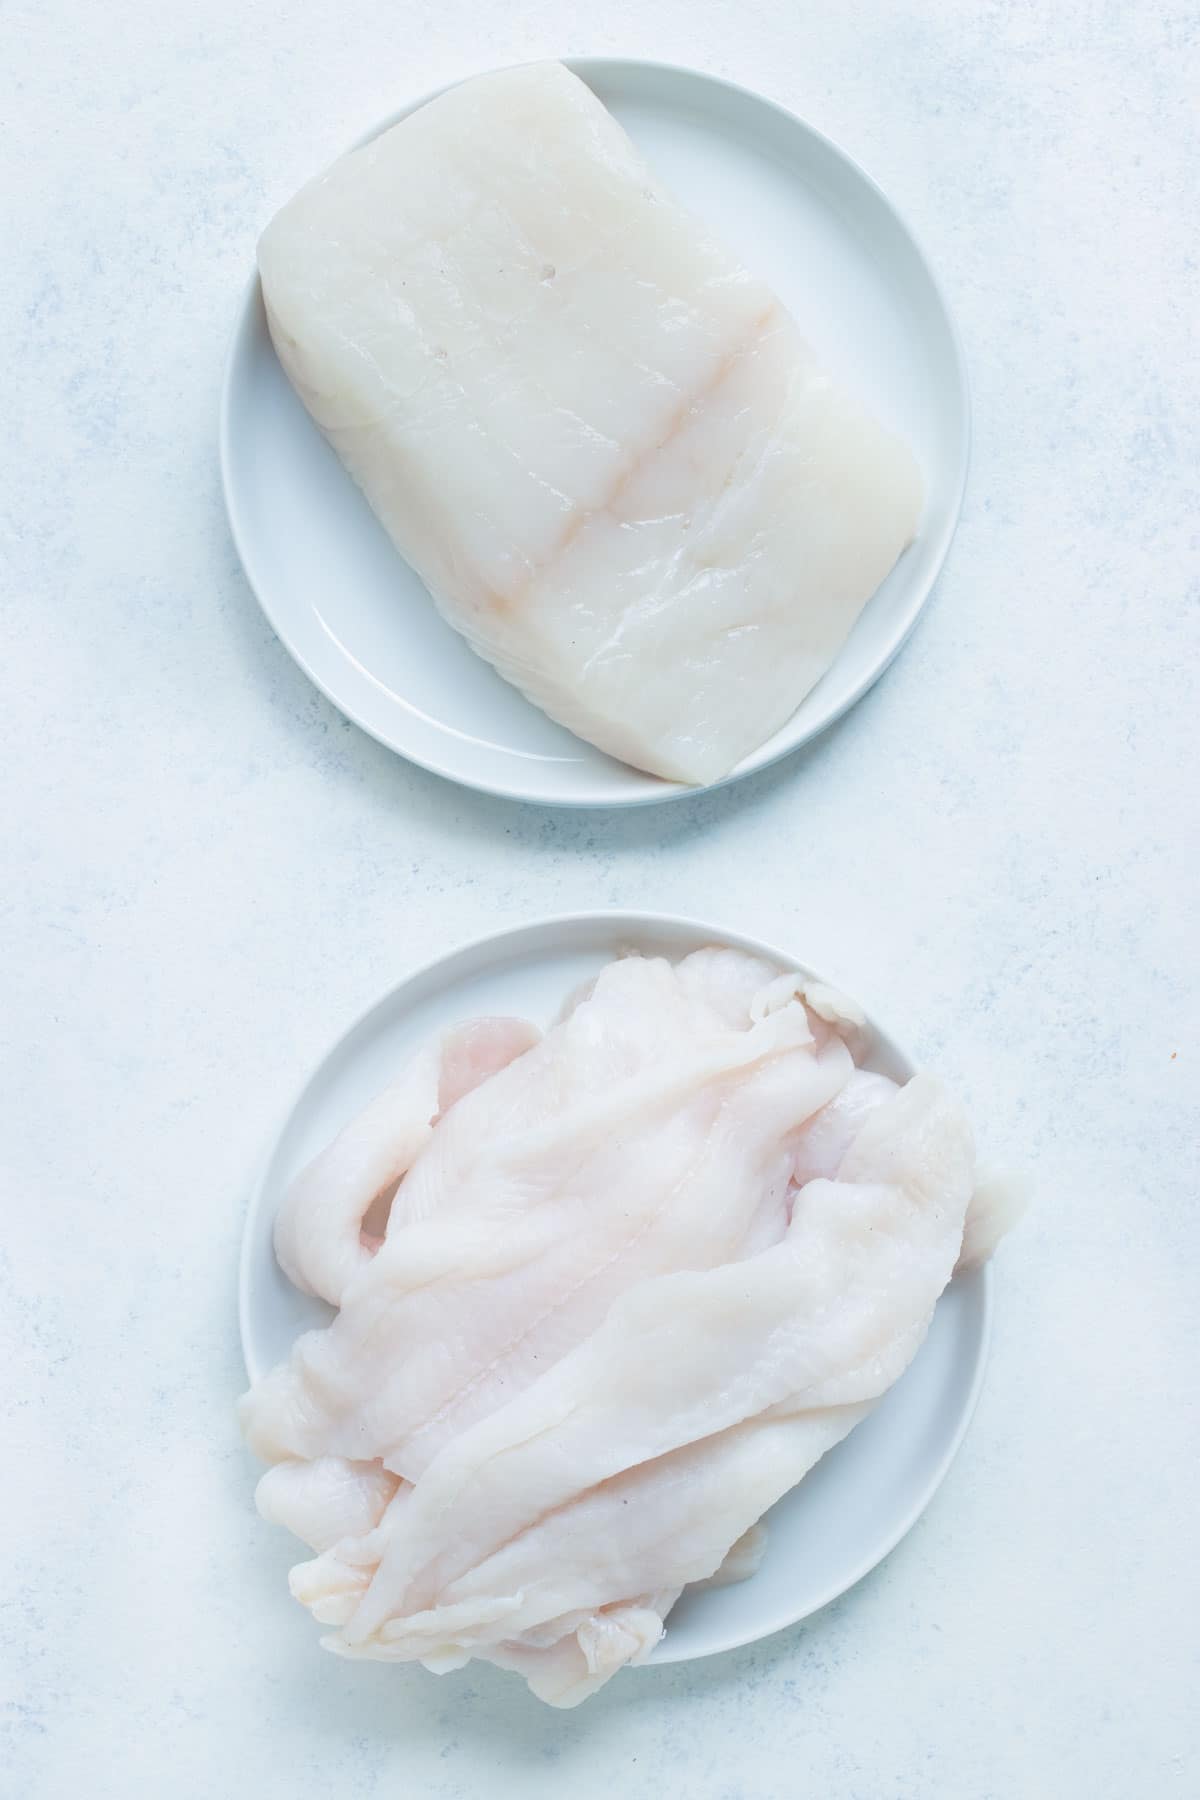 Cod fillets and other types of white fish are shown for this recipe.